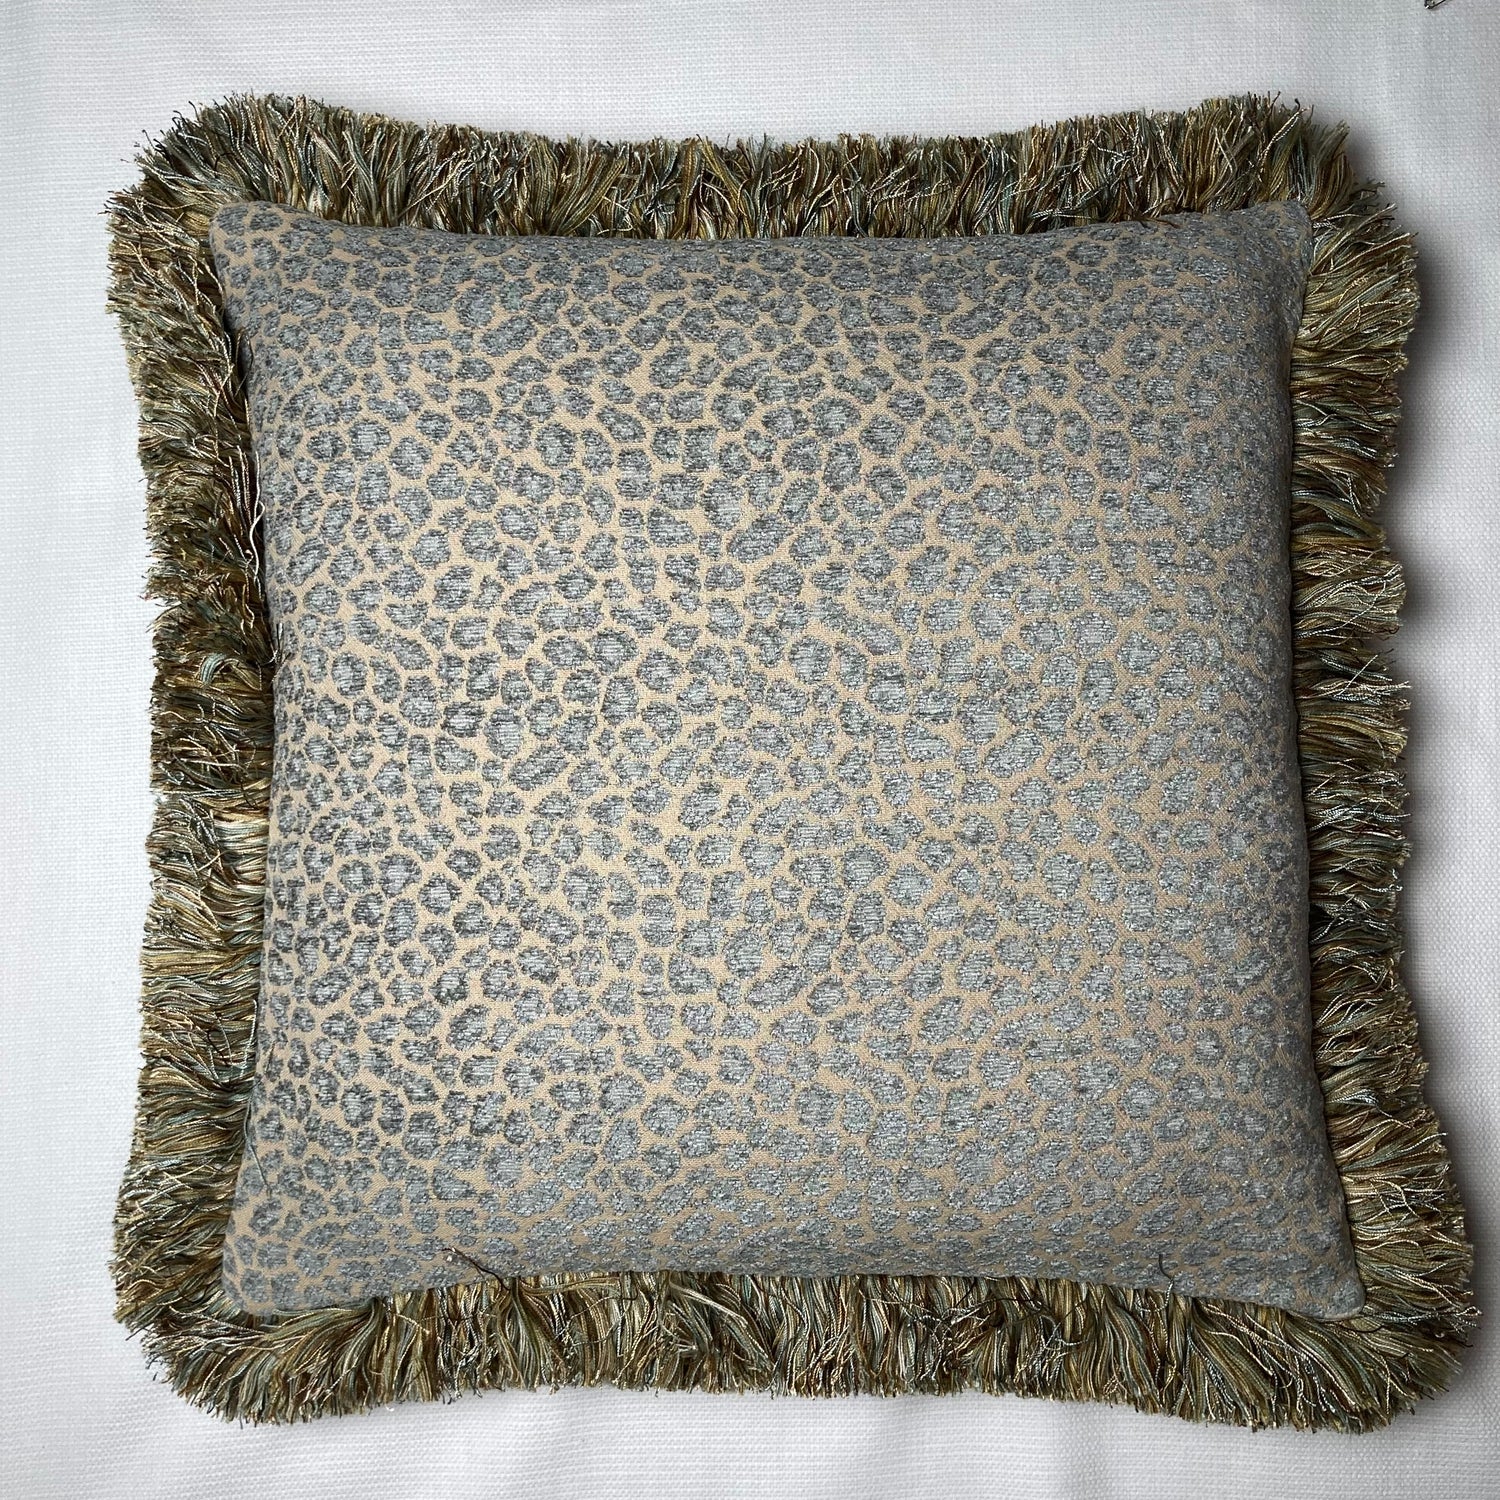 Gold Damask Stripe with Leopard 19 X 19 Square Designer Pillow Back with Down Feather Insert